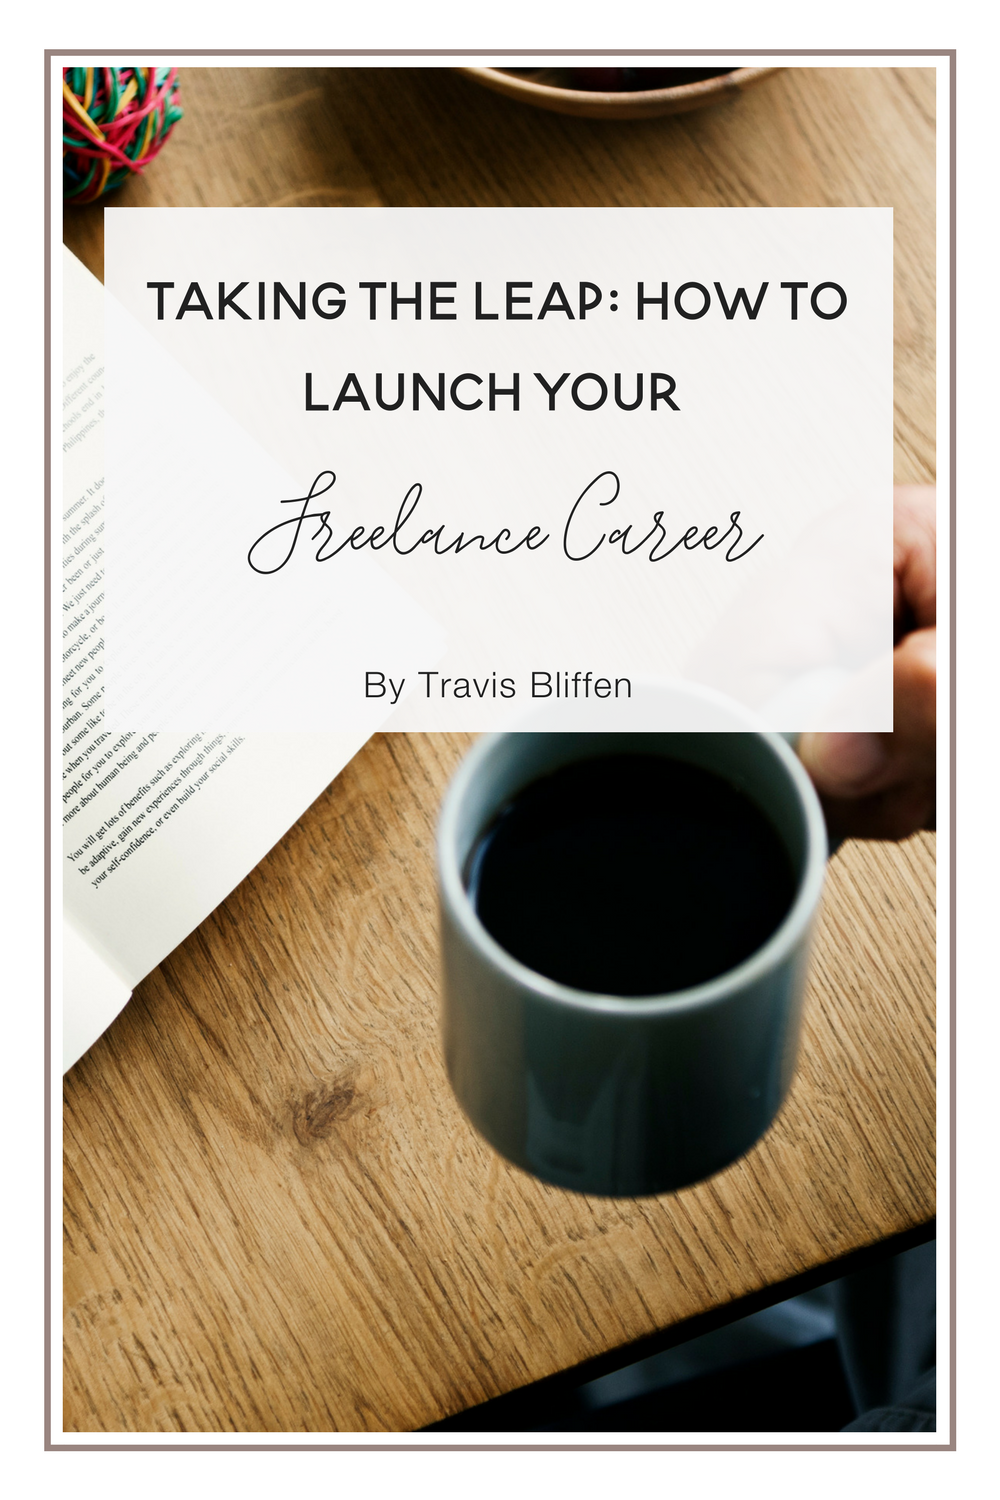 Taking the Leap: How to Launch Your Freelance Career